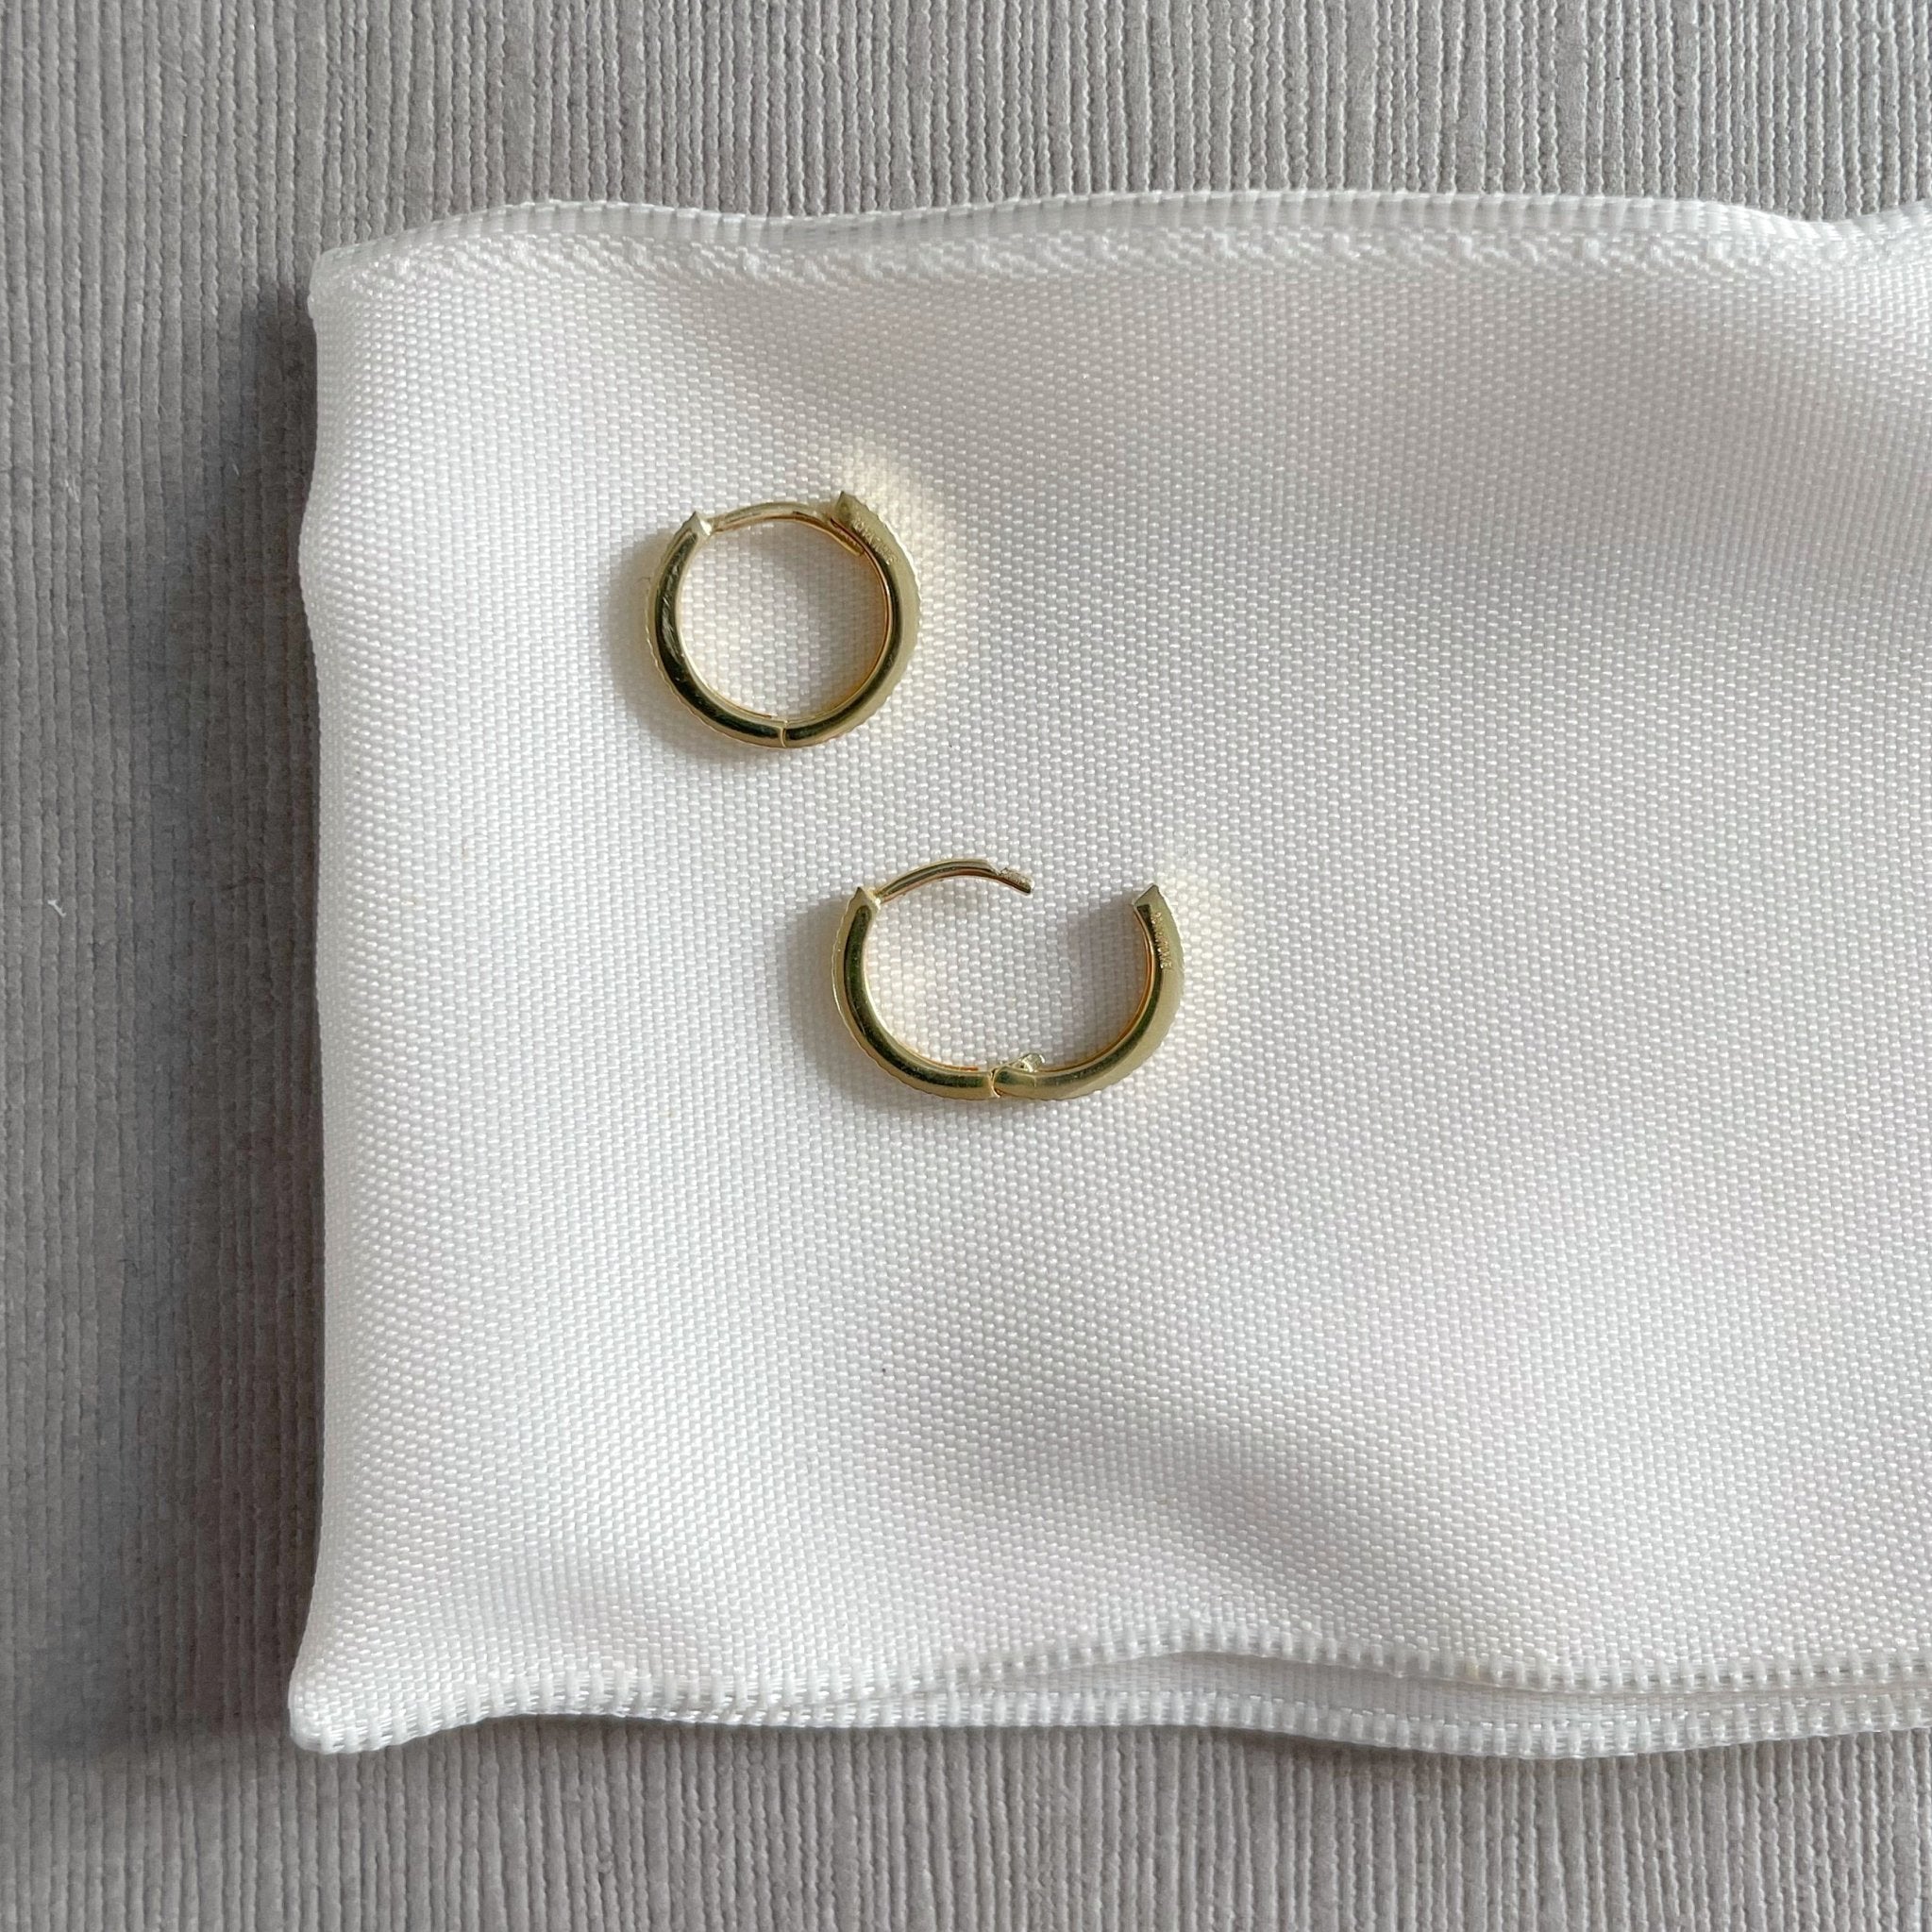 Solid Gold Ruth Huggies by Sarah Cornwell Jewelry. Solid gold tiny hoop huggie earrings with one open on a white and gray background.